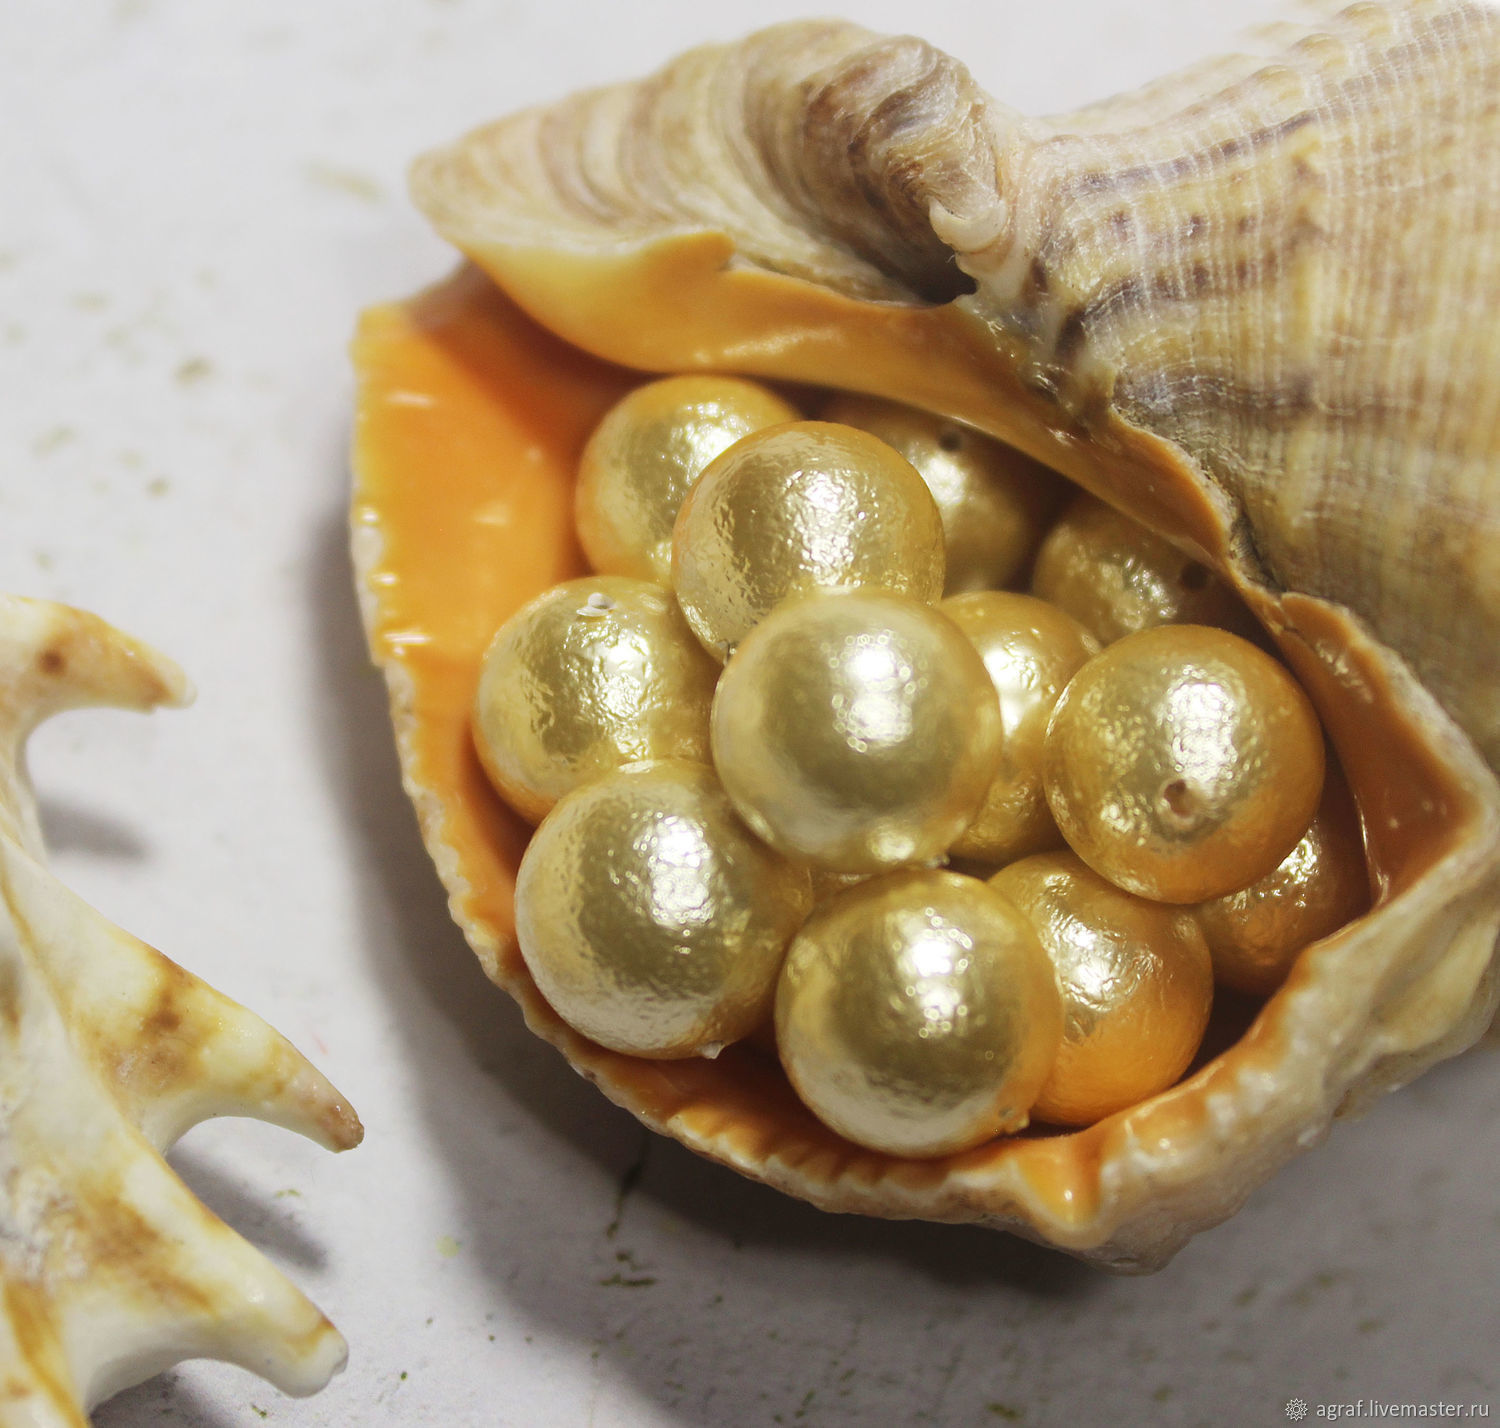 Exploring pearls found in large shells - Amazing United State